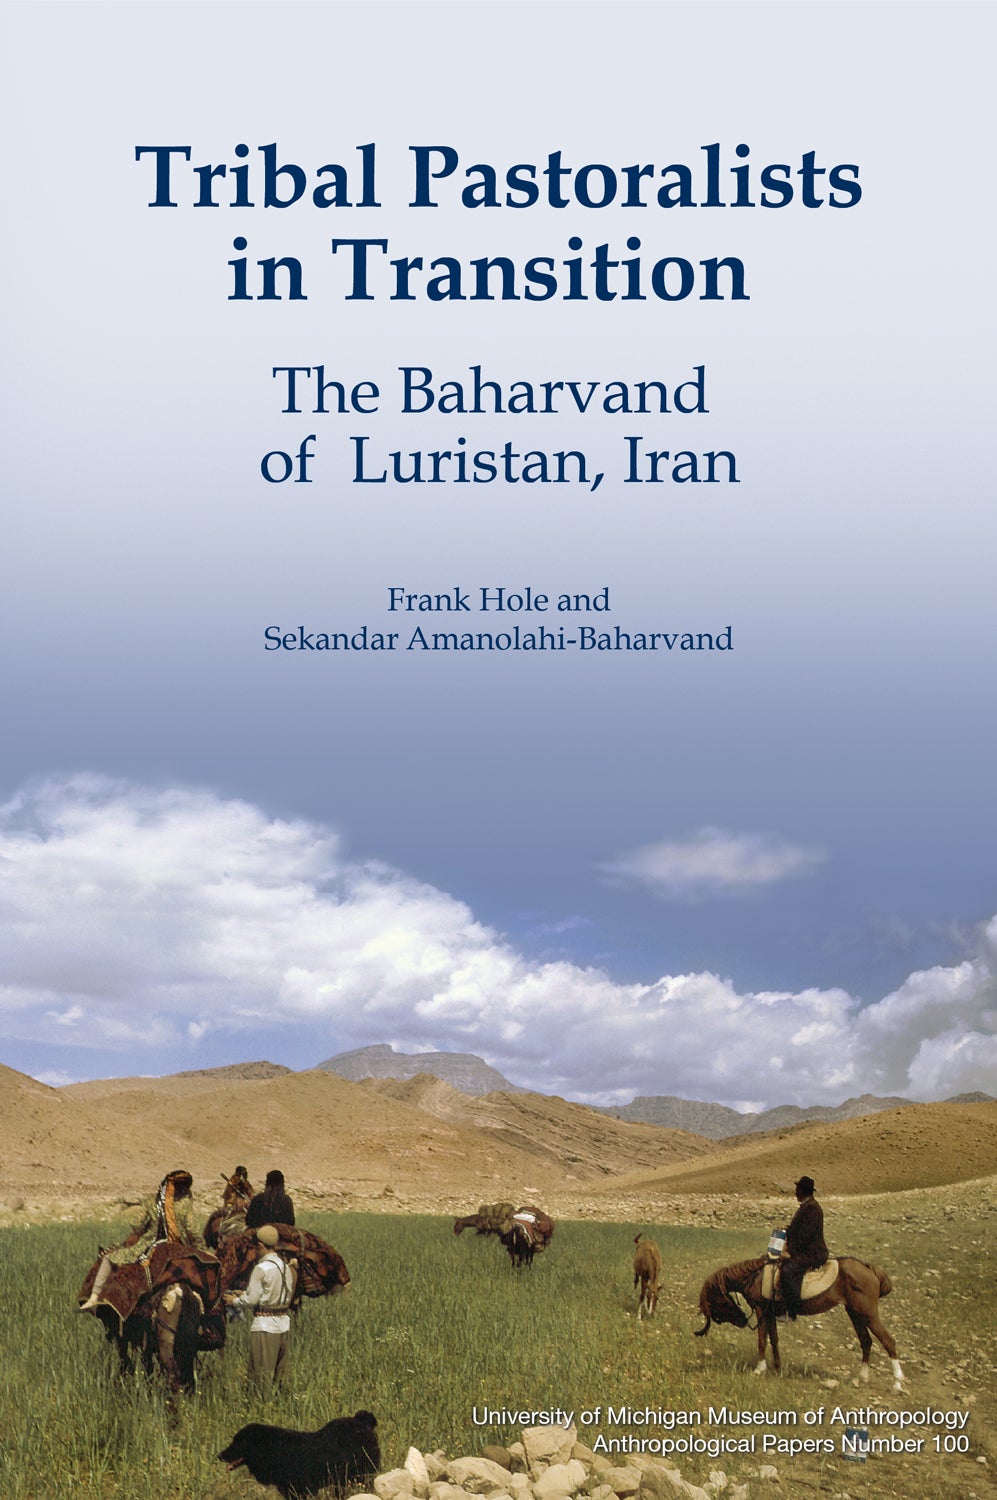 Tribal Pastoralists in Transition: The Baharvand of Luristan, Iran